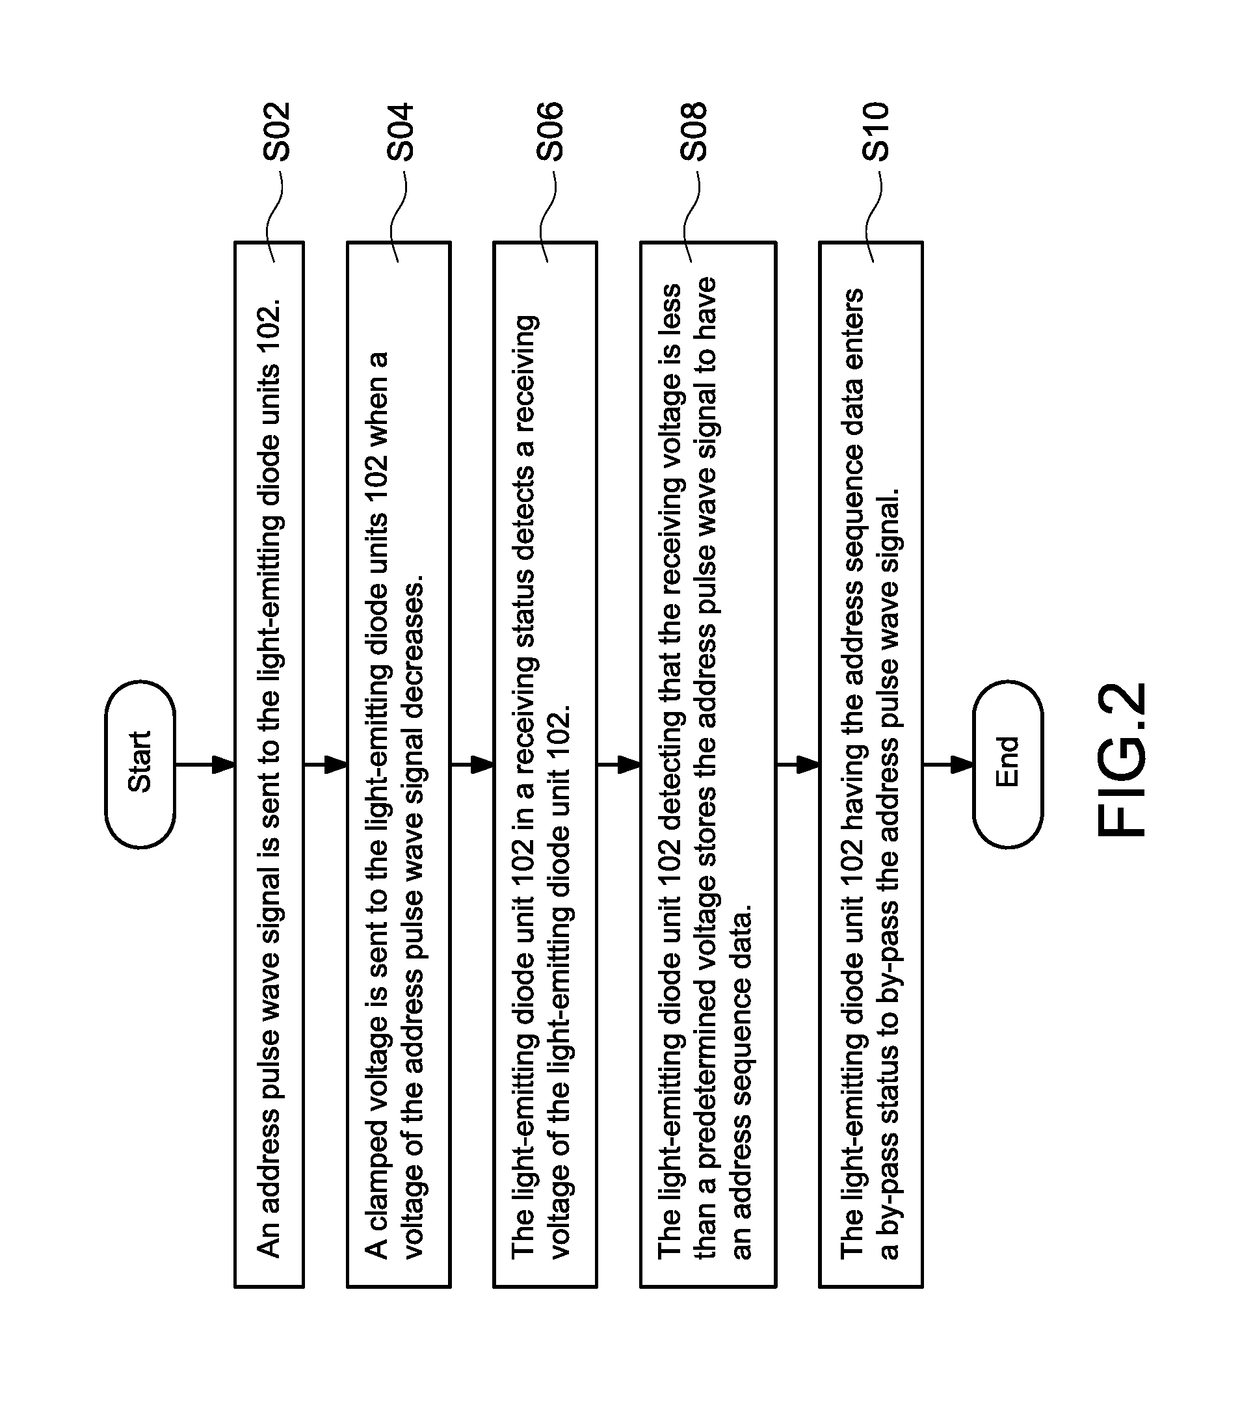 Sequencing method for light-emitting diode lamp string